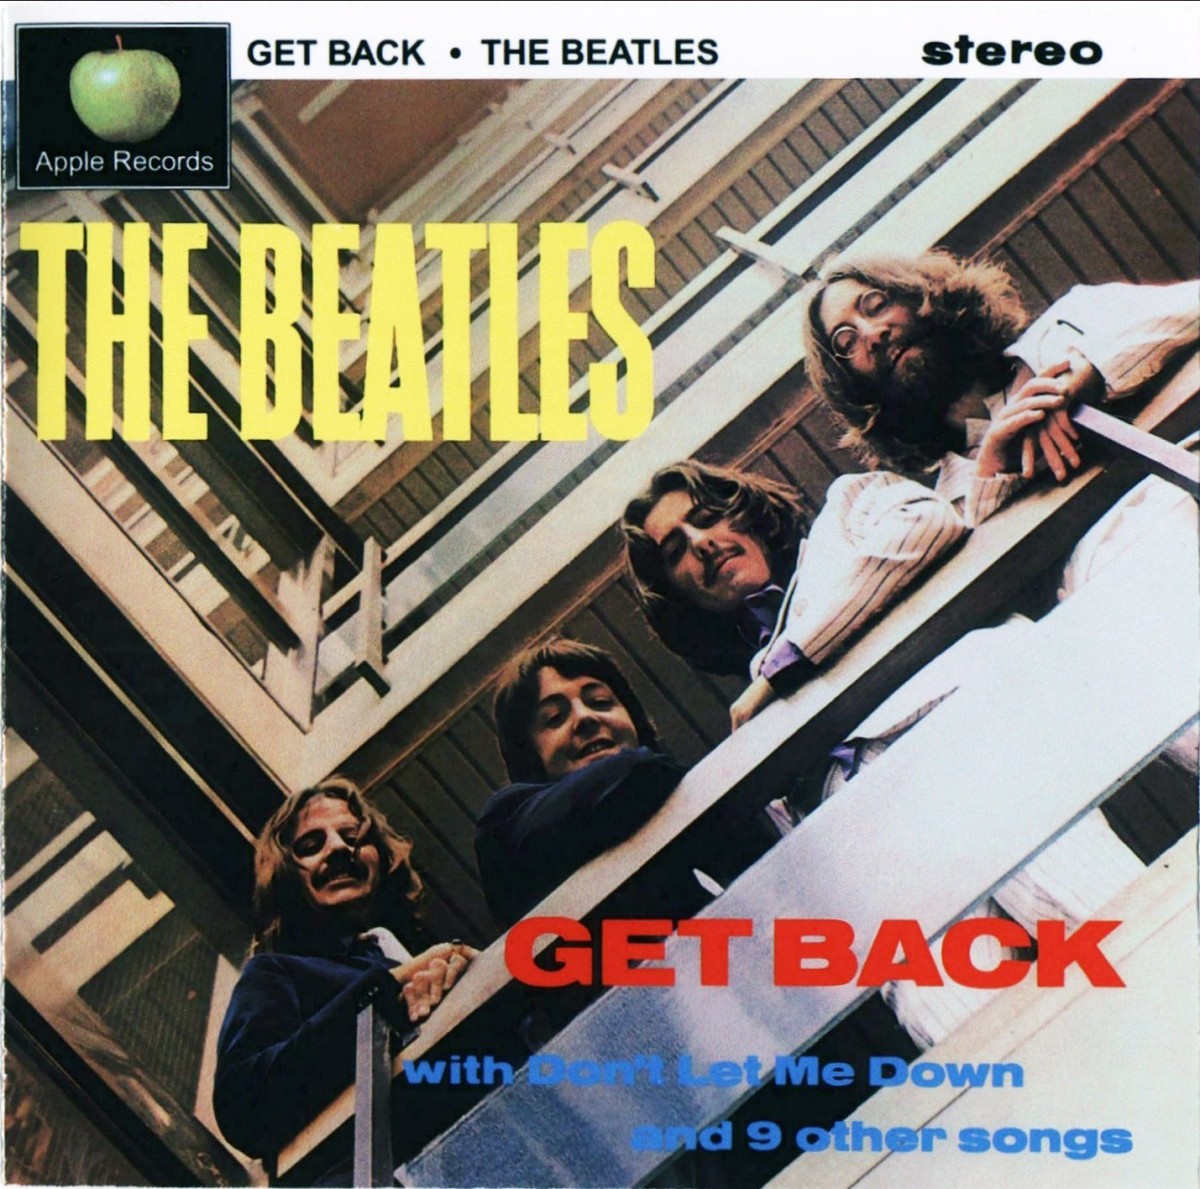 A release of the album under the title "Get Back".